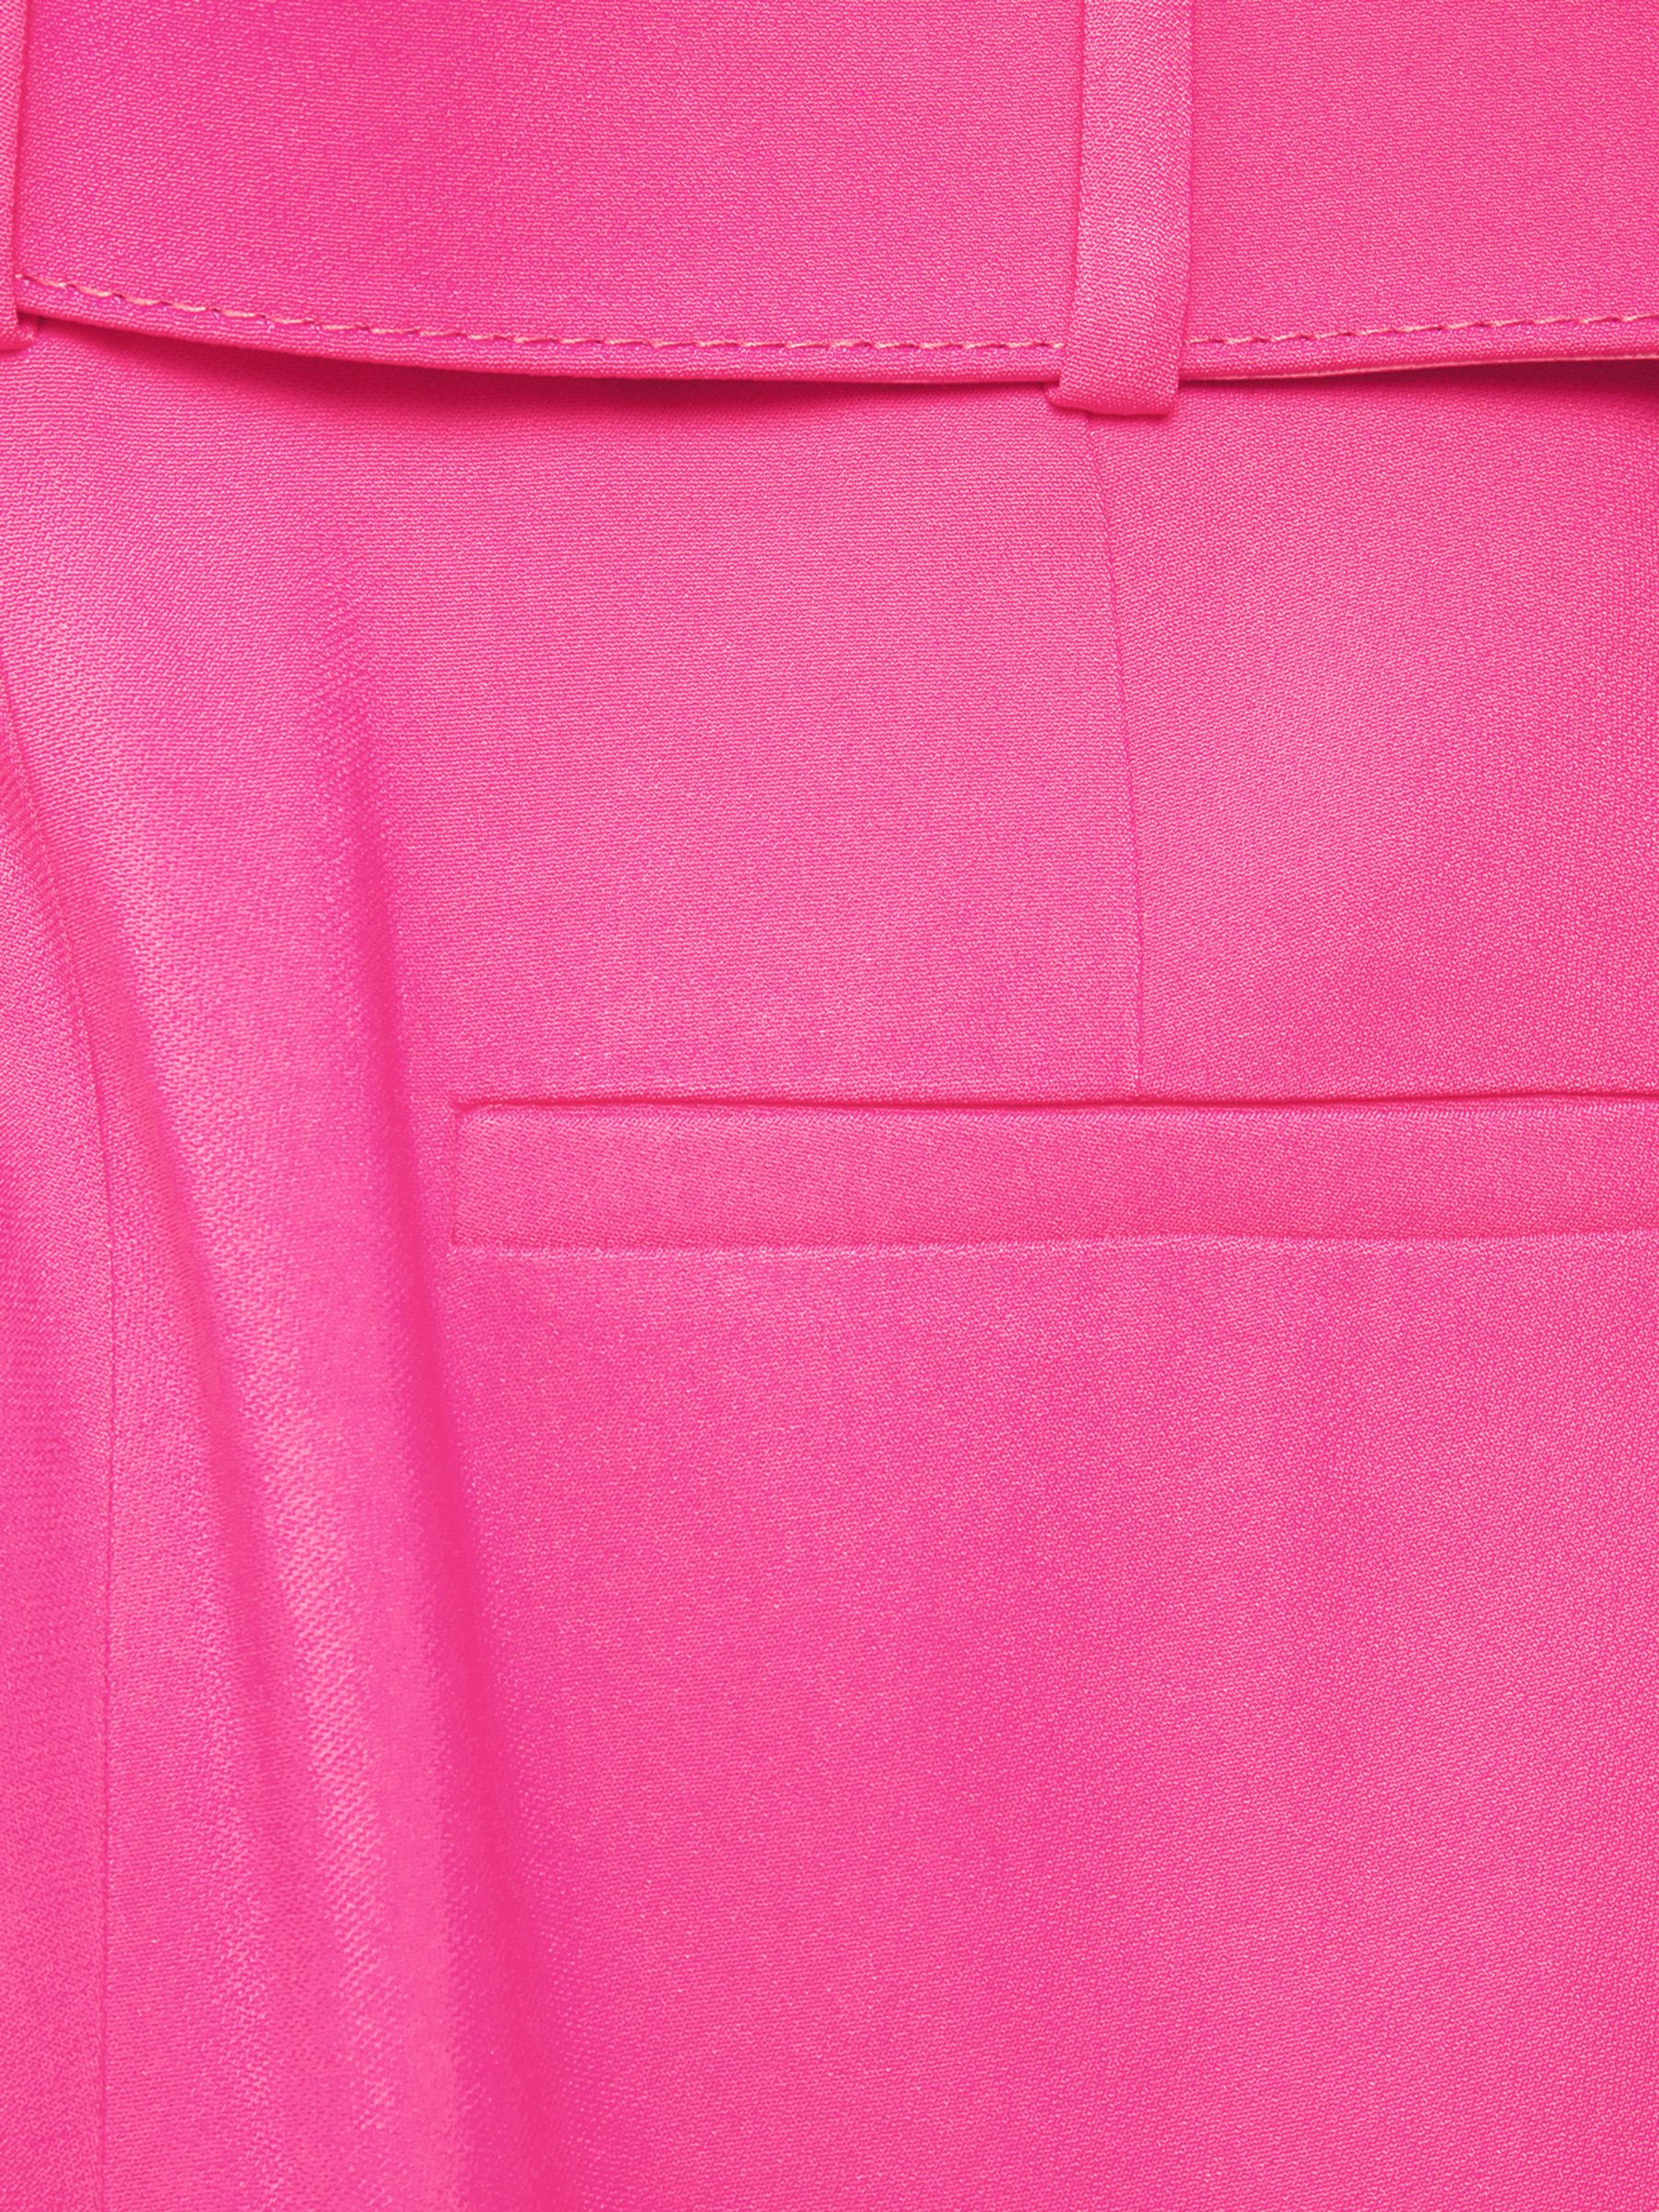 Phase Eight Adria Tailored Belted Trousers, Hot Pink at John Lewis ...